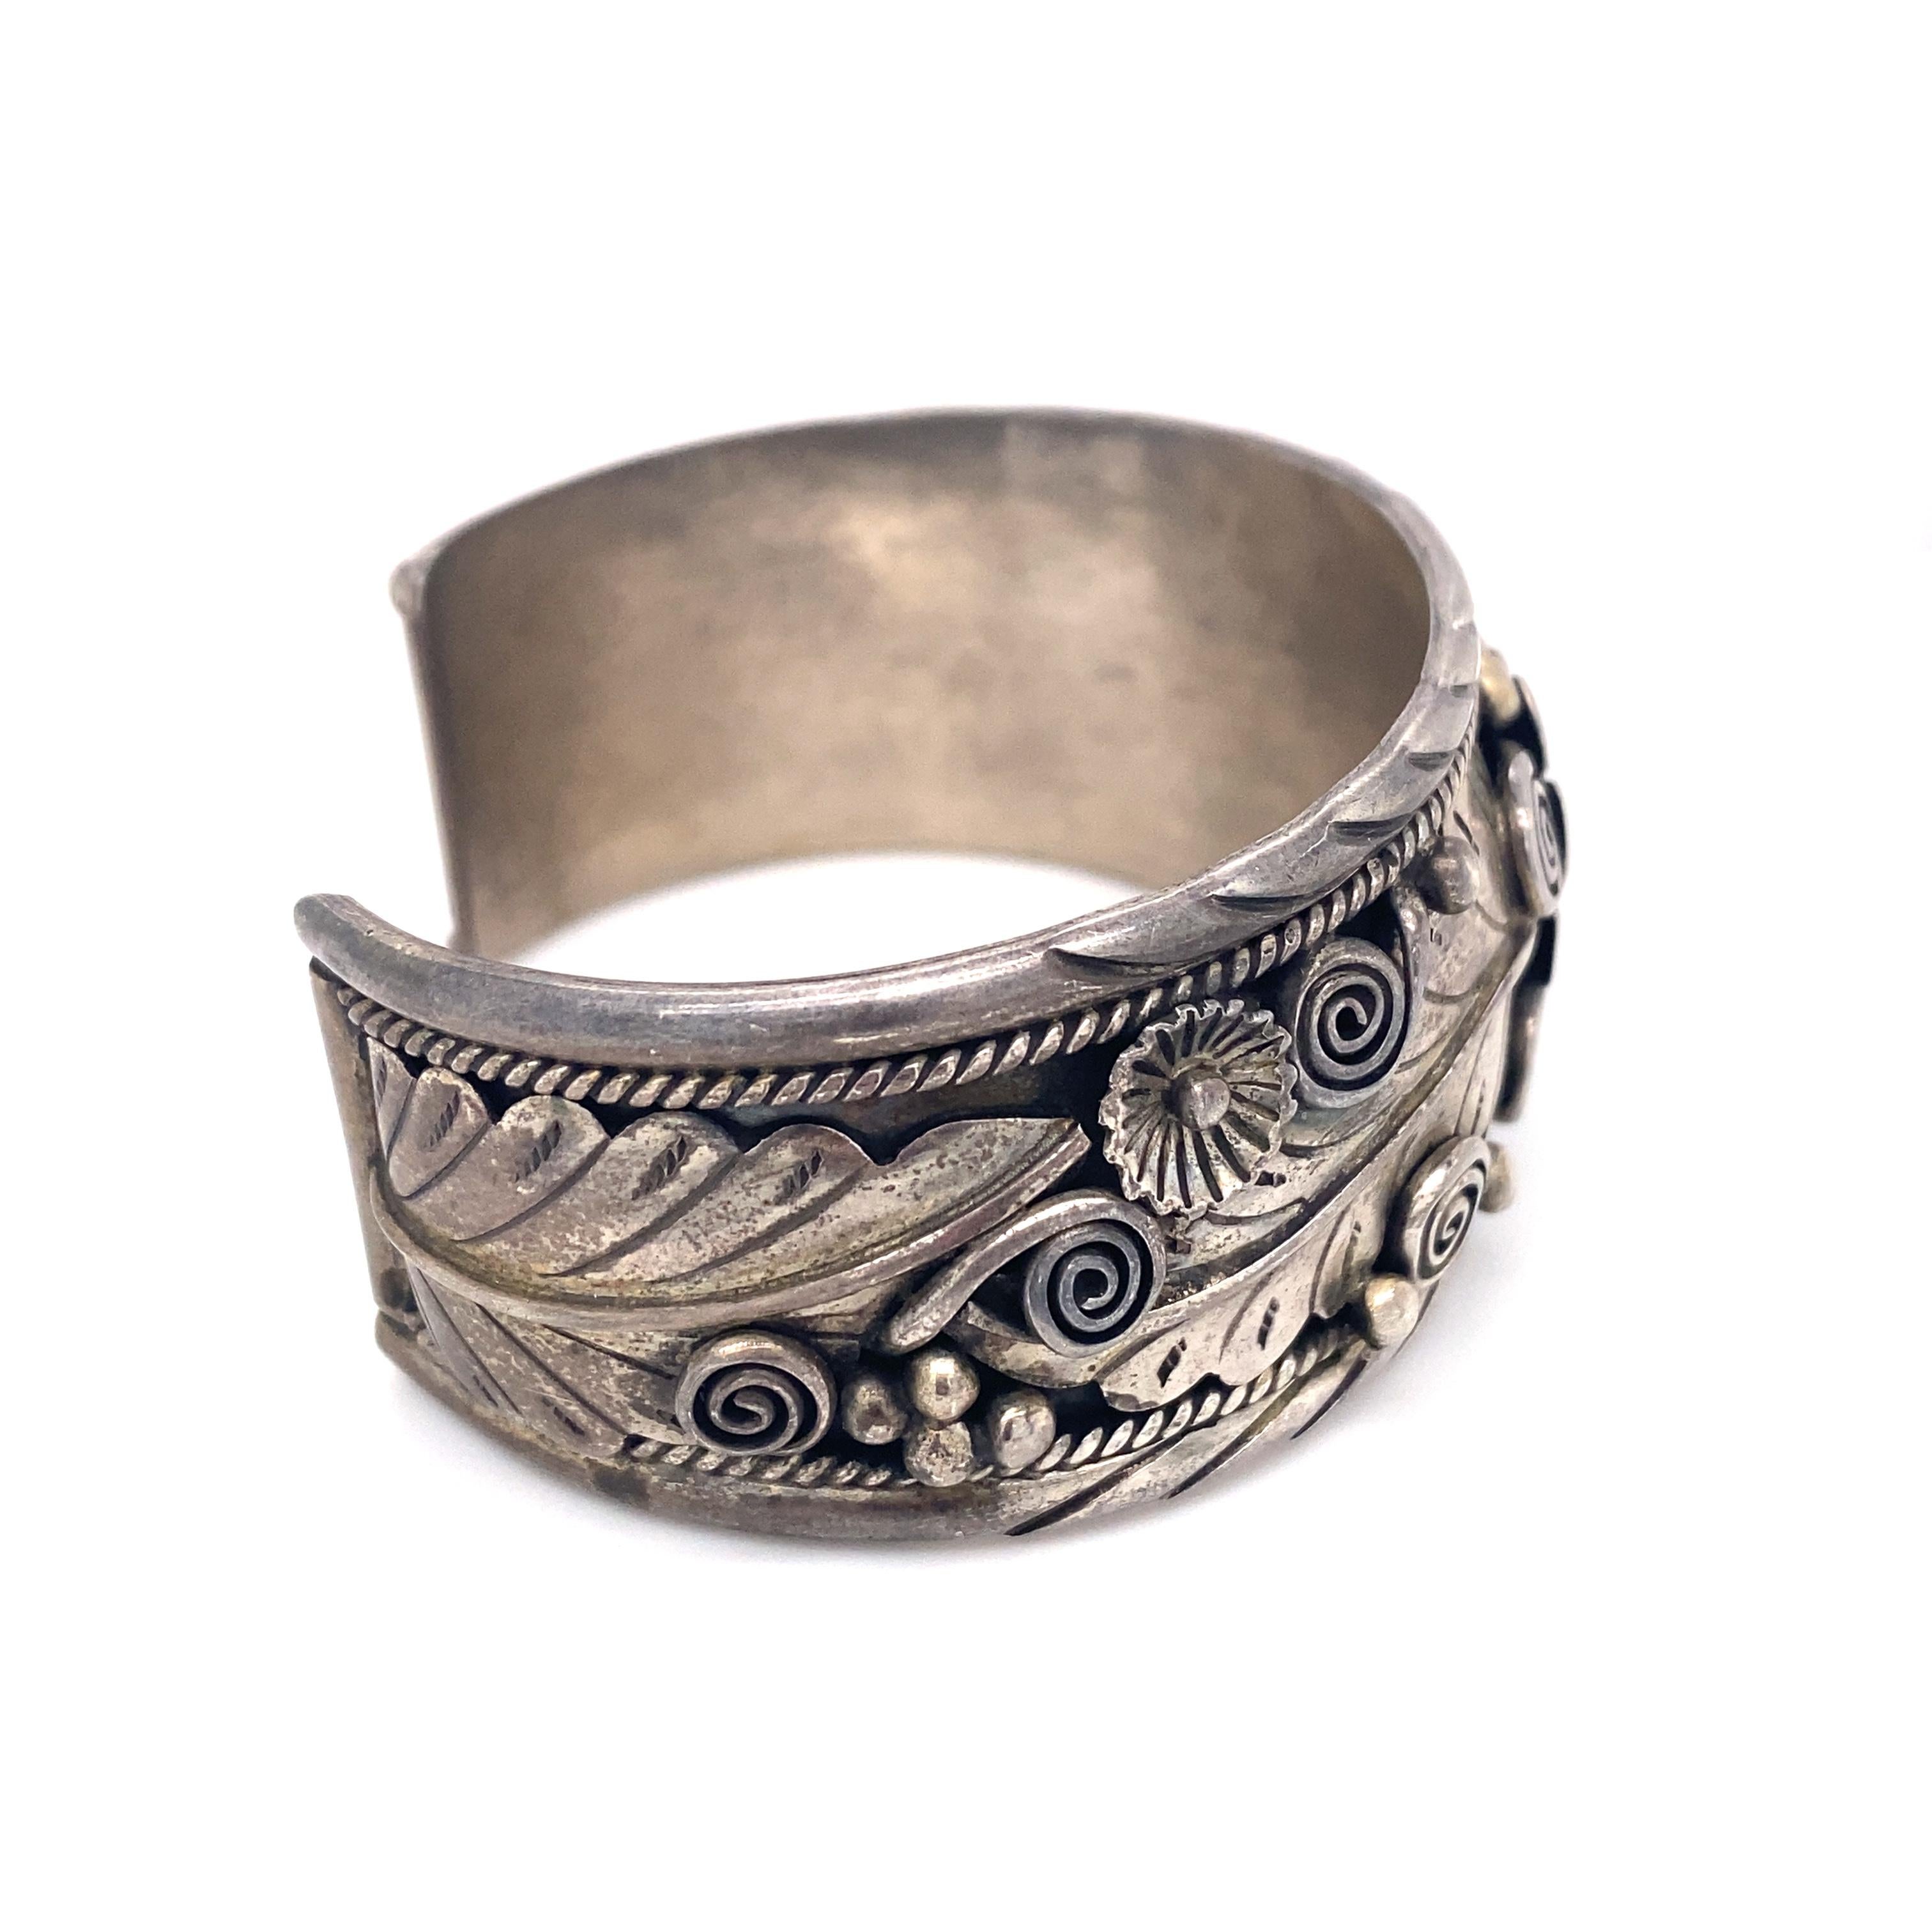 Circa: 1970s
Metal Type: Sterling silver
Weight: 53 grams
Marked Parlos